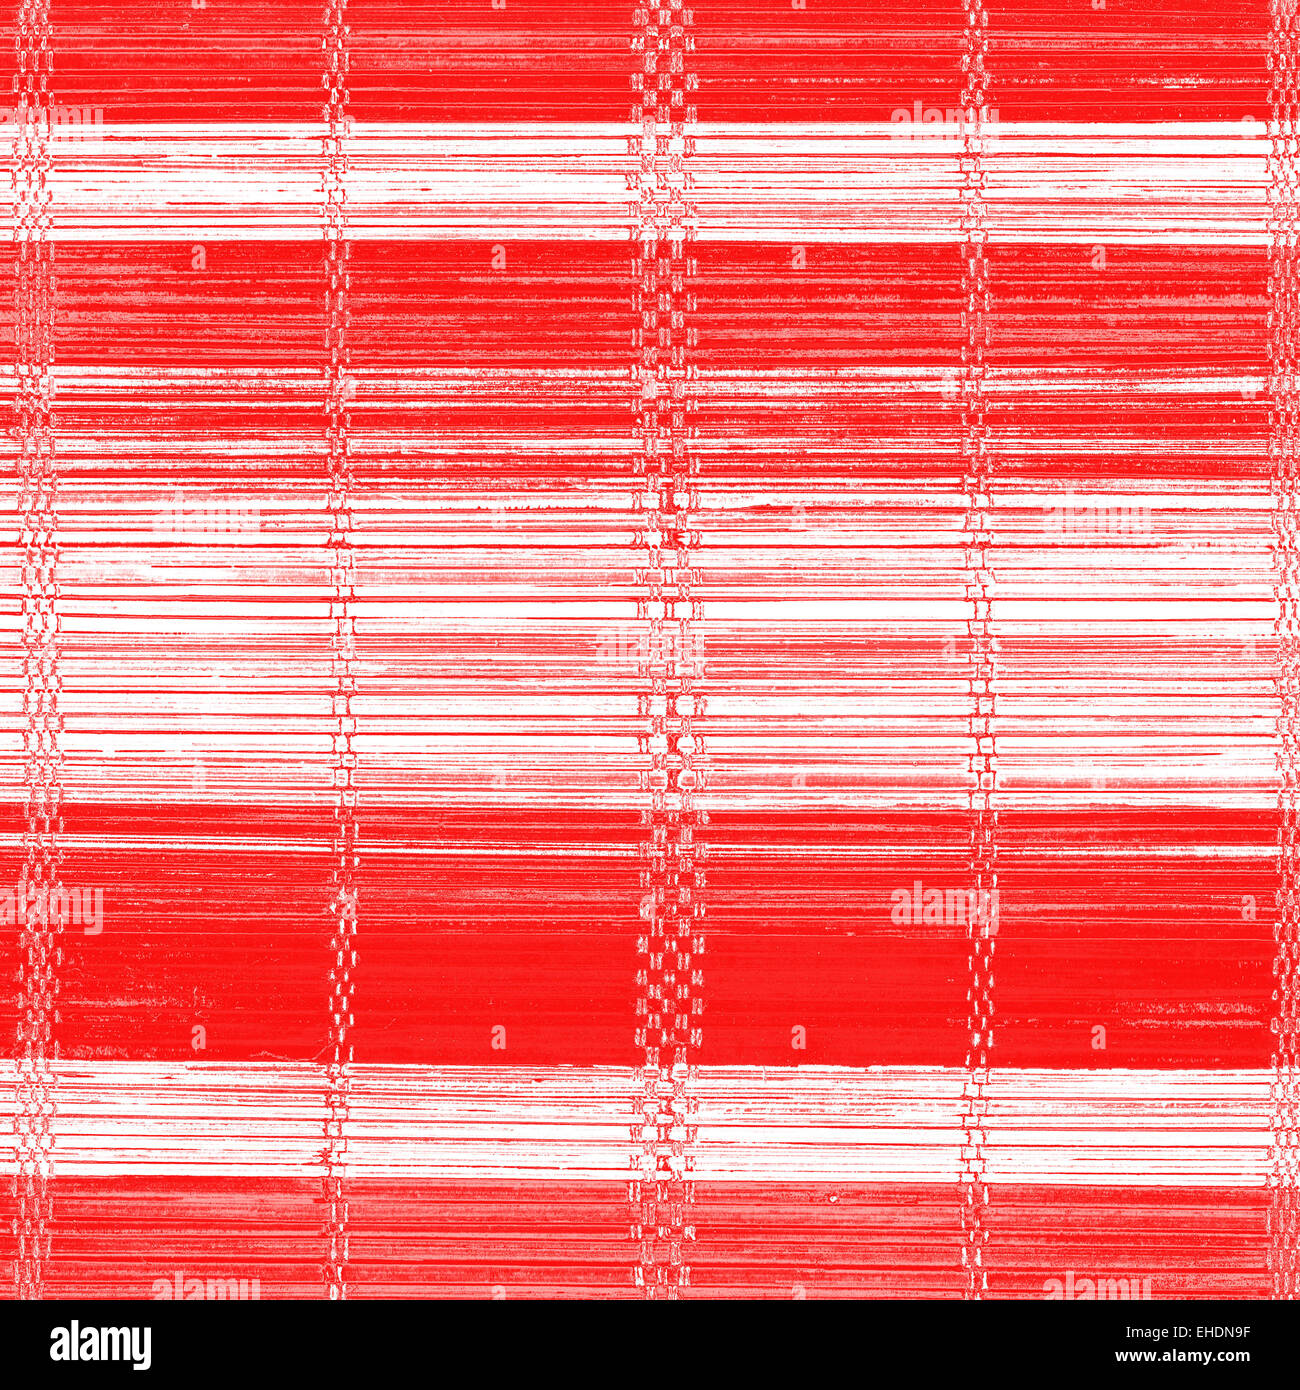 Red-white abstract striped background Stock Photo